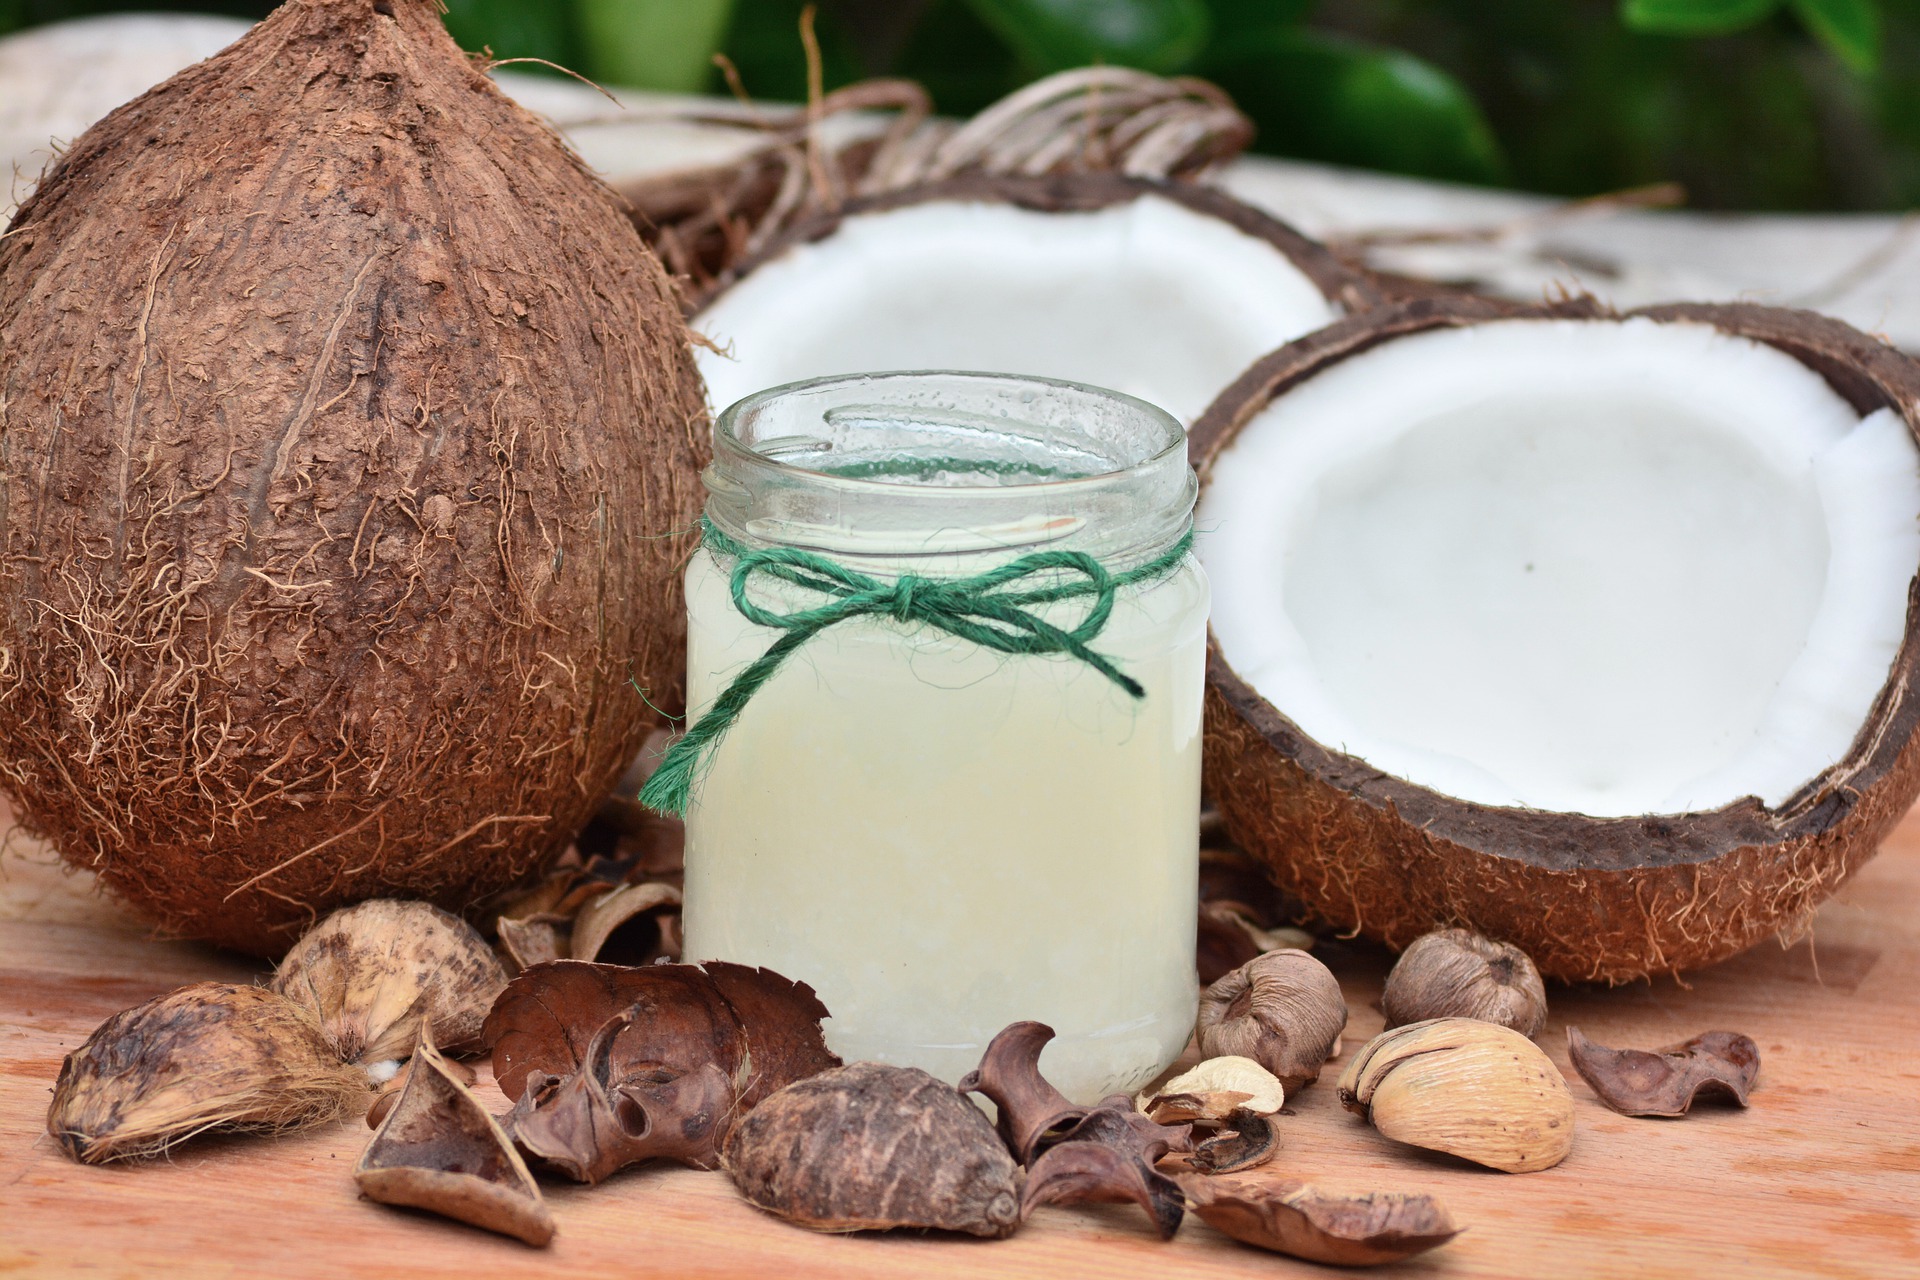 COCONUT OIL AND ITS USES